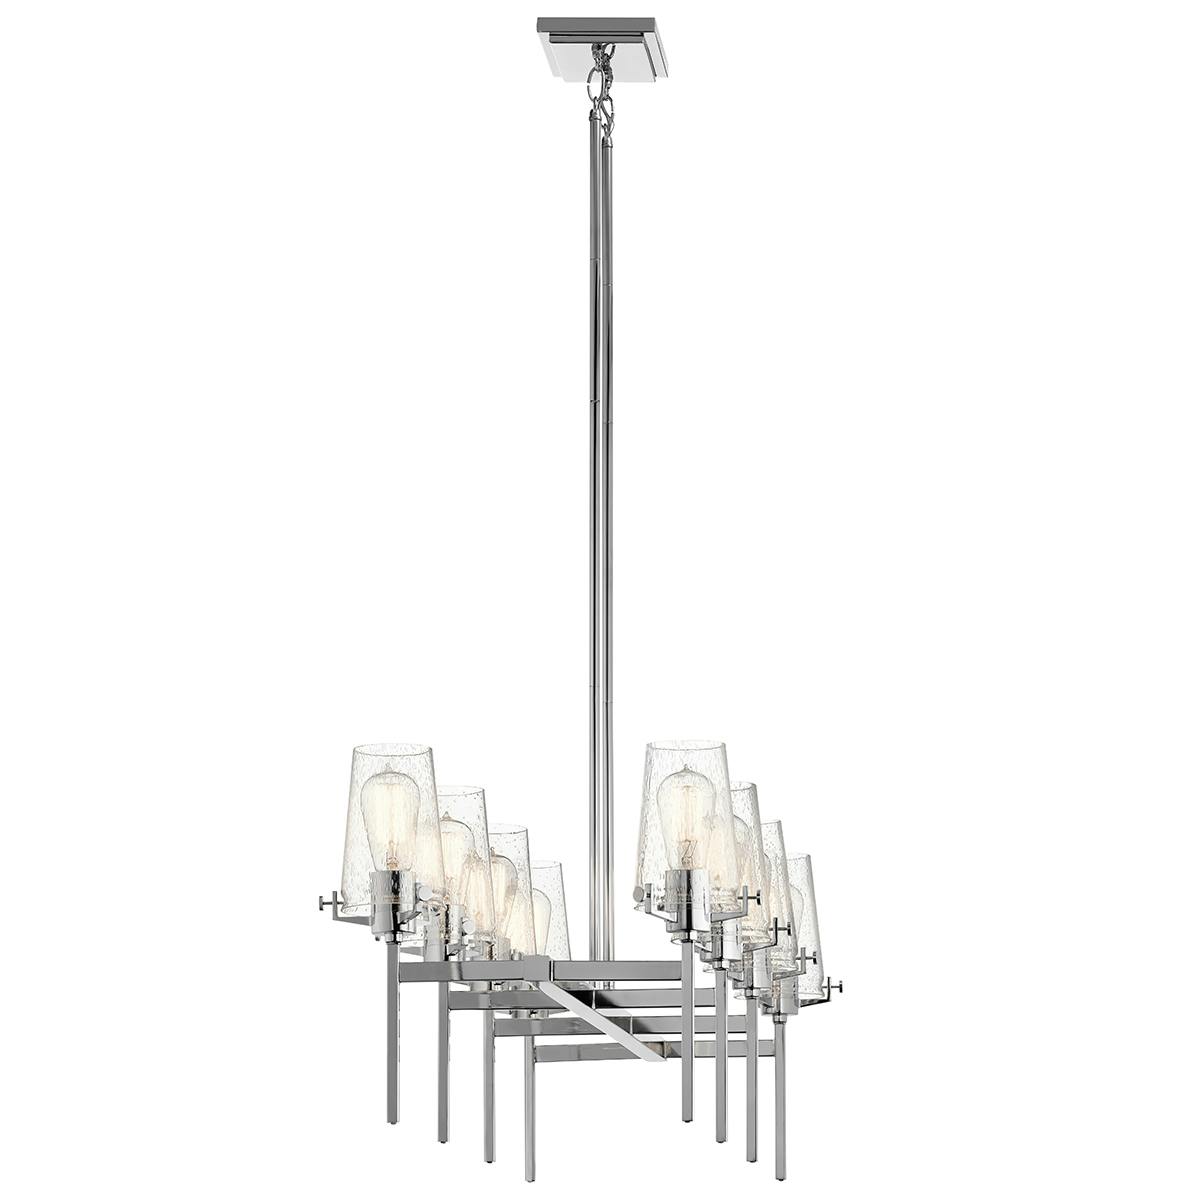 Profile view of the Alton 46" Linear Chandelier Chrome on a white background